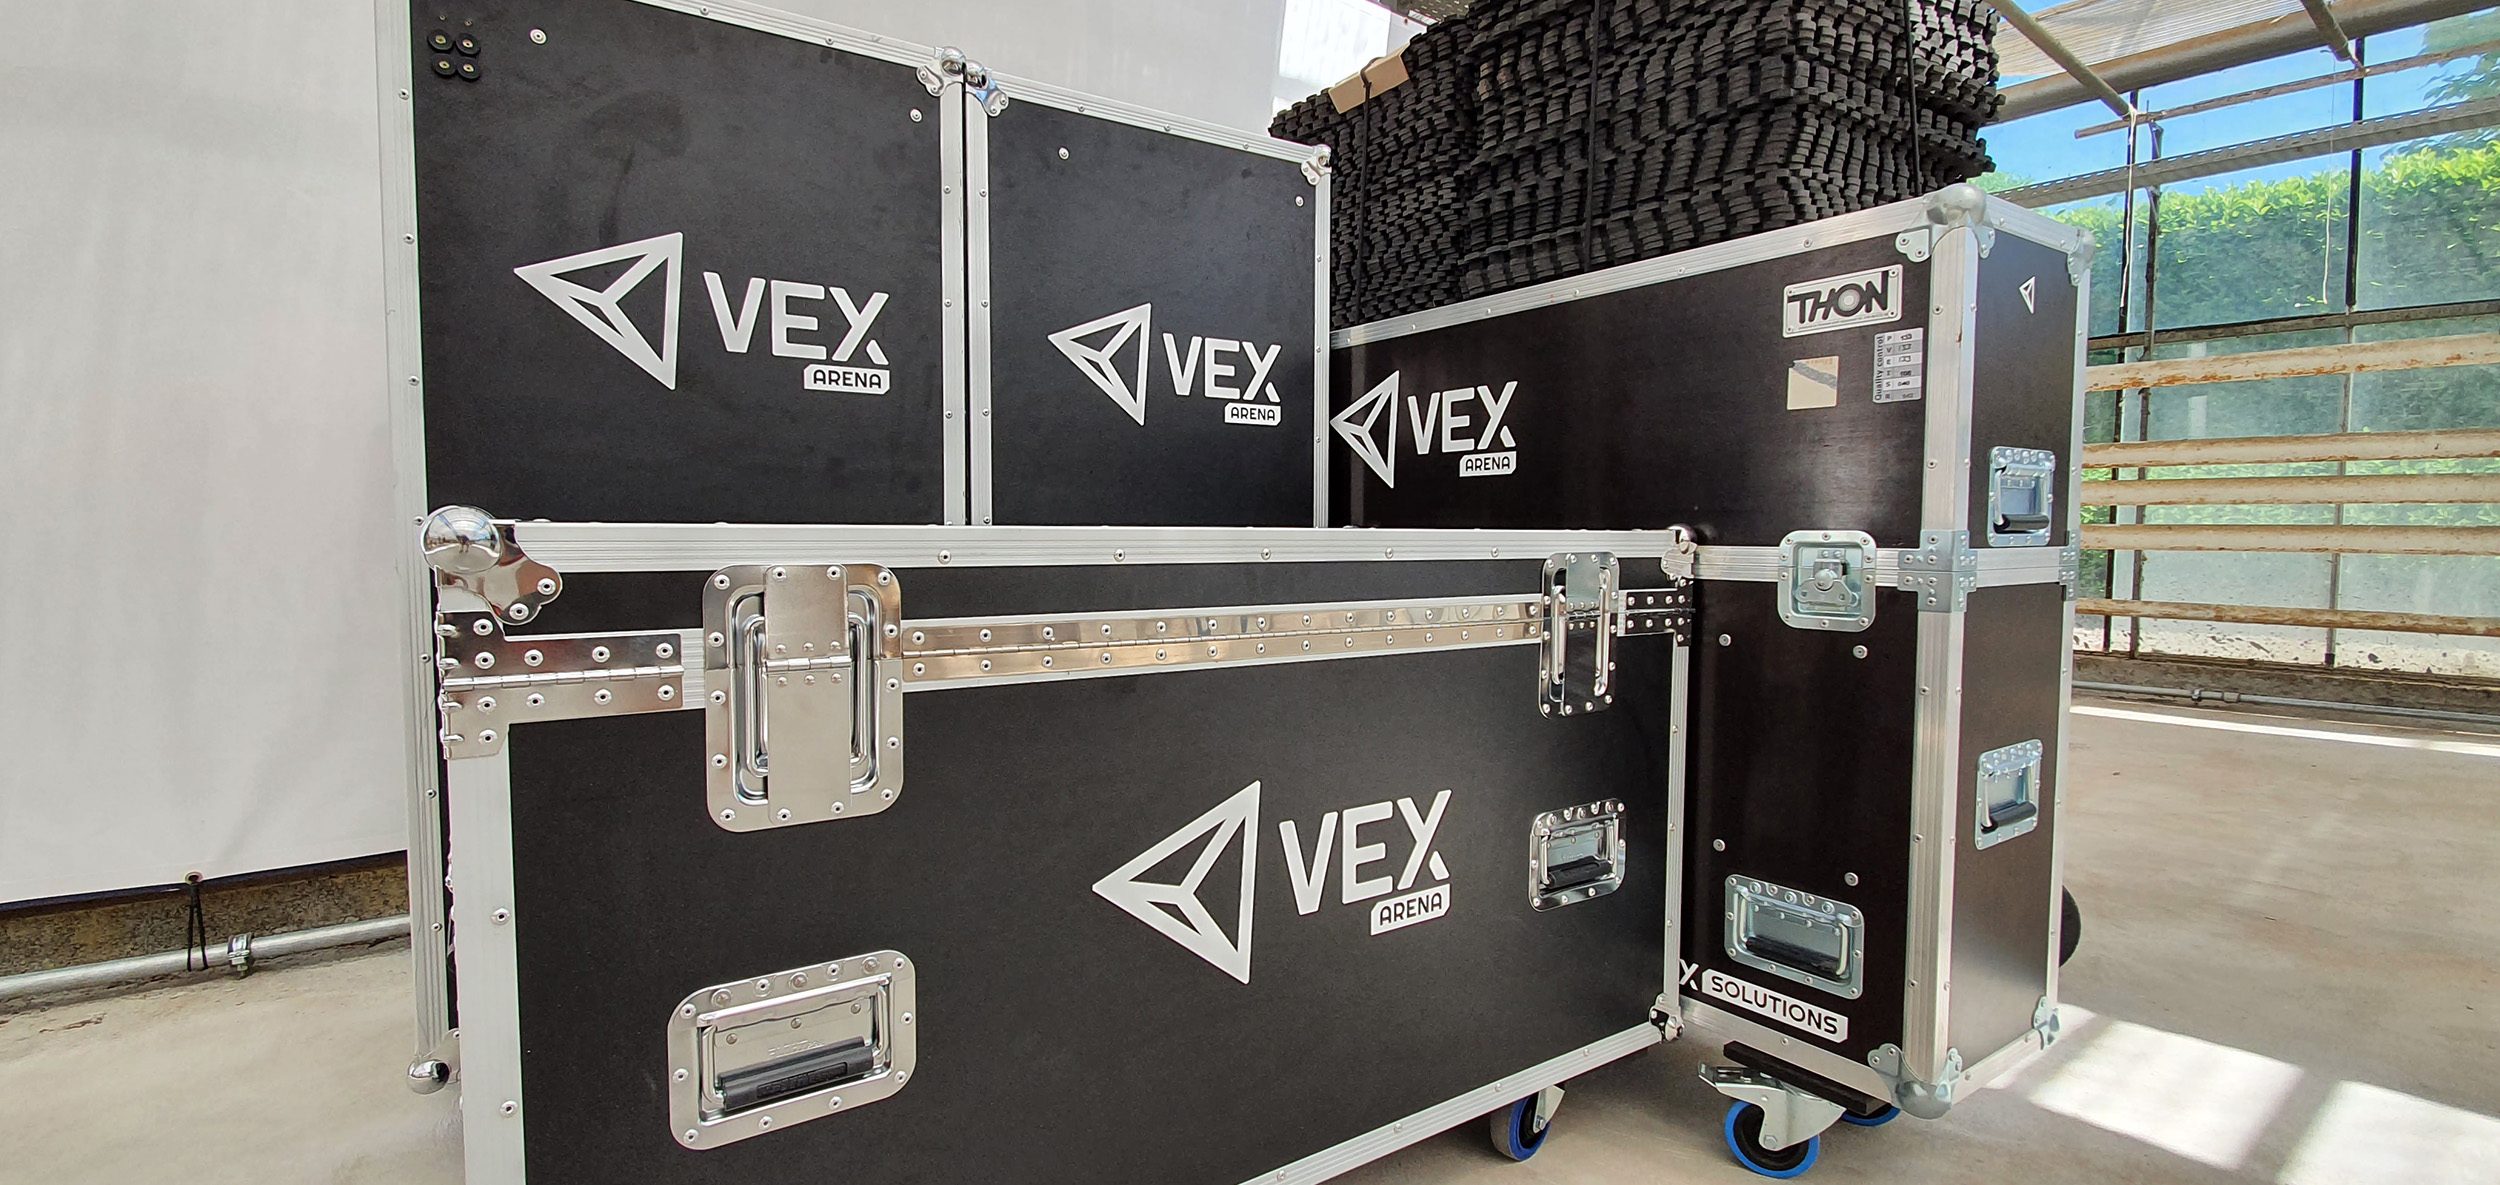 VEX Arena mobile, the only virtual reality arena you can move around